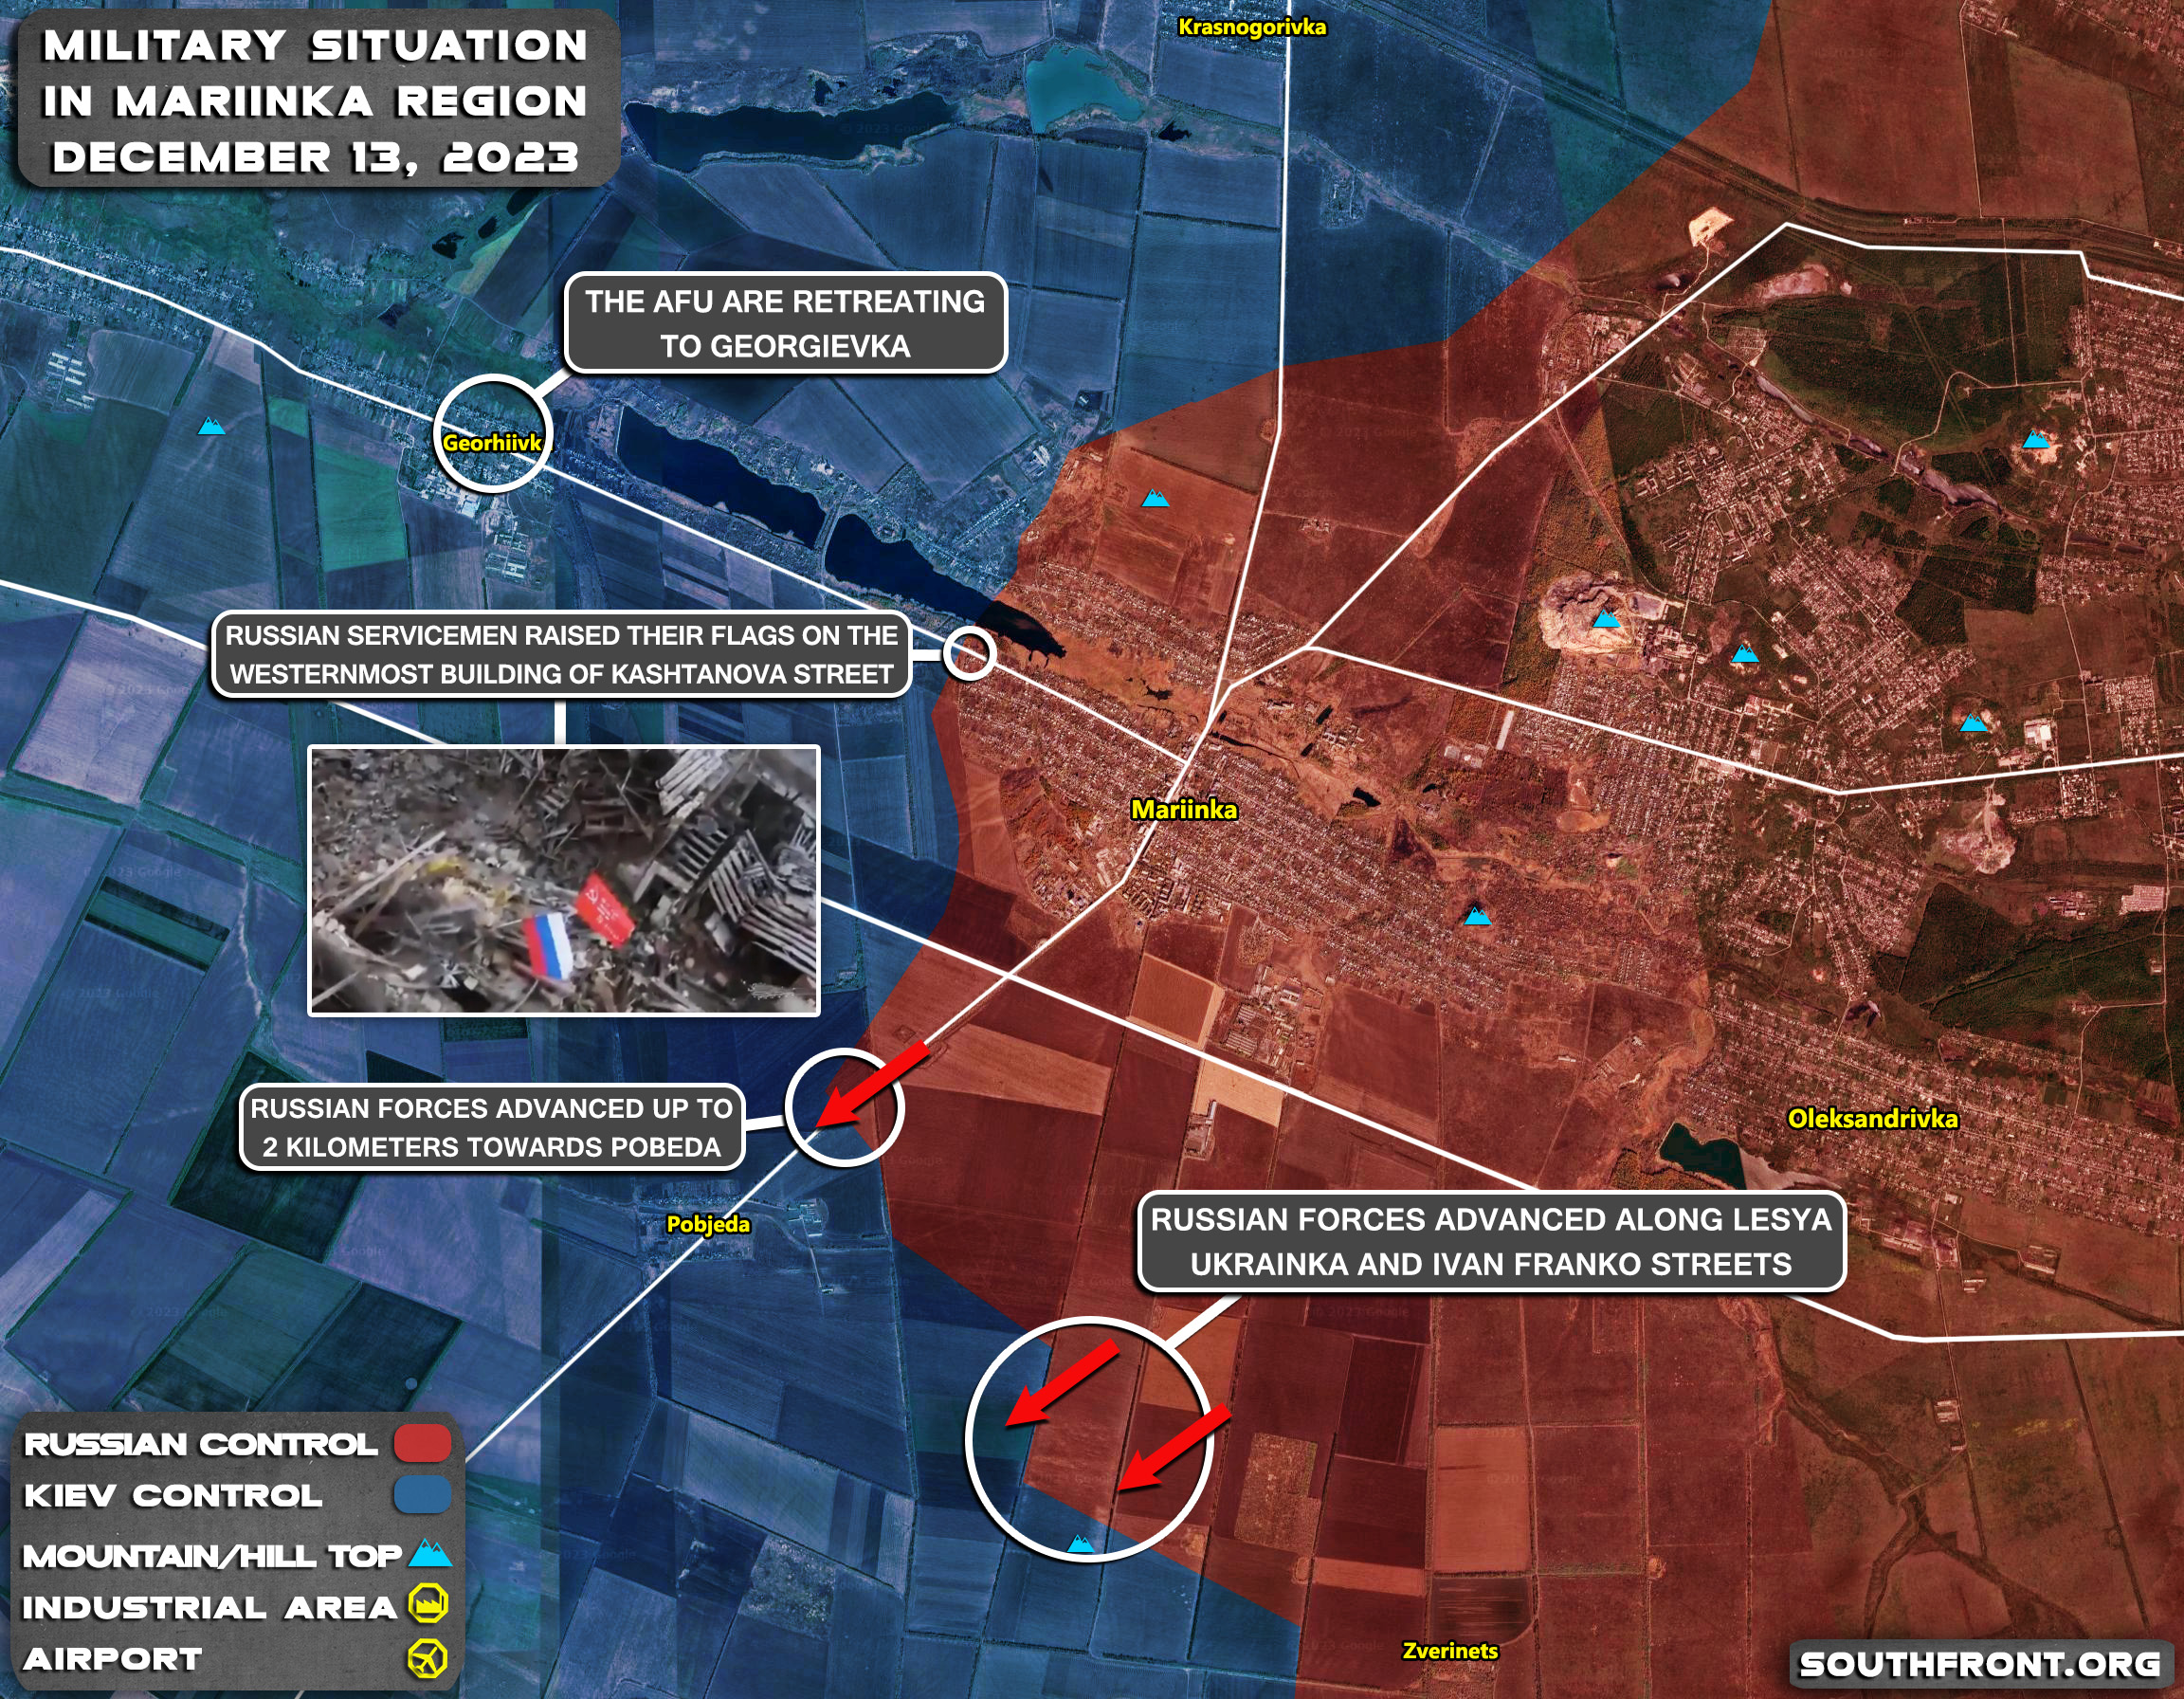 Maryinka De Facto Came Under Full Russian Control (Videos, Map Update)